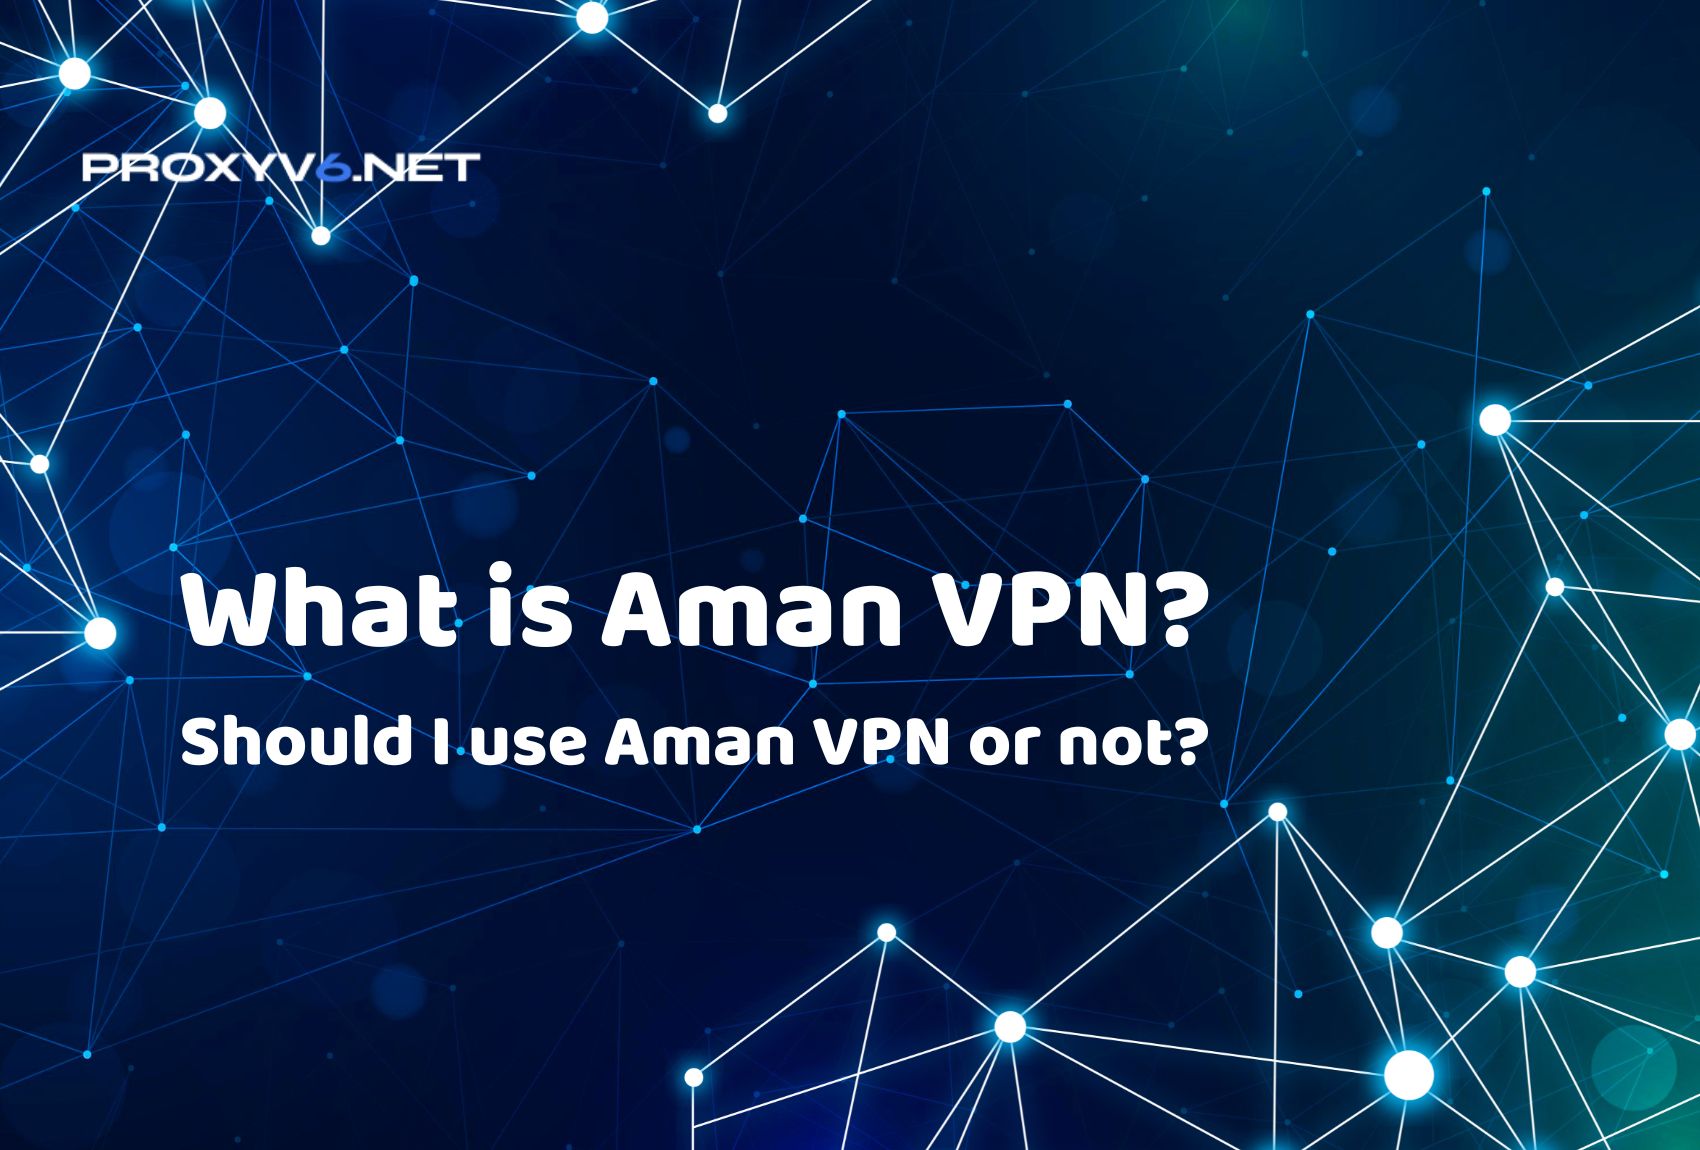 Is Aman VPN safe to use?